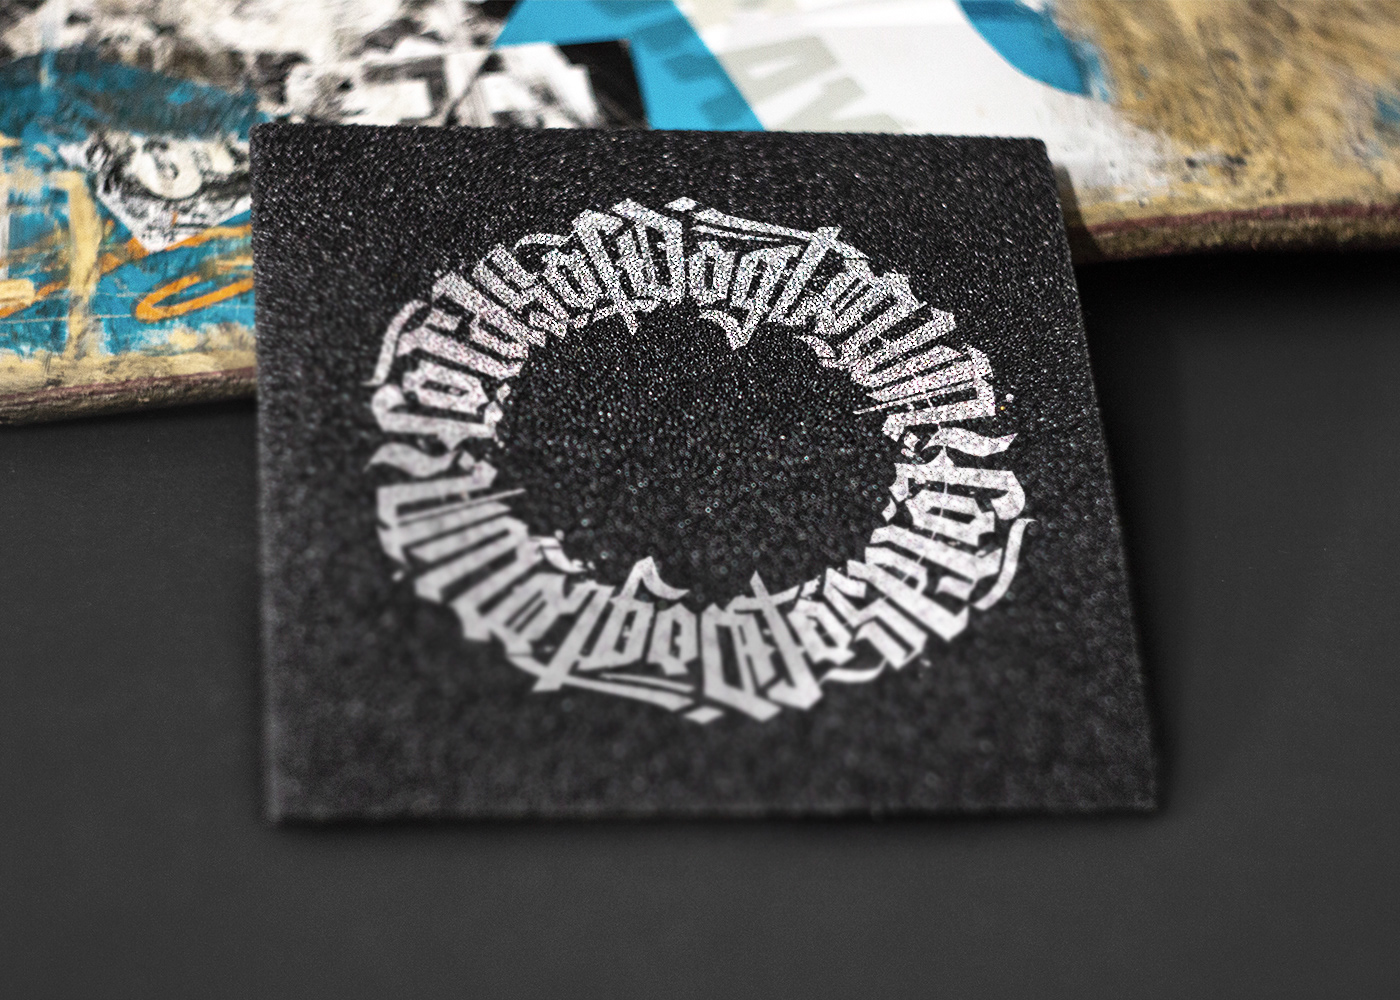 CD cover album cover dvd cover Calligraphy   lettering typography   skateboard Packaging movie